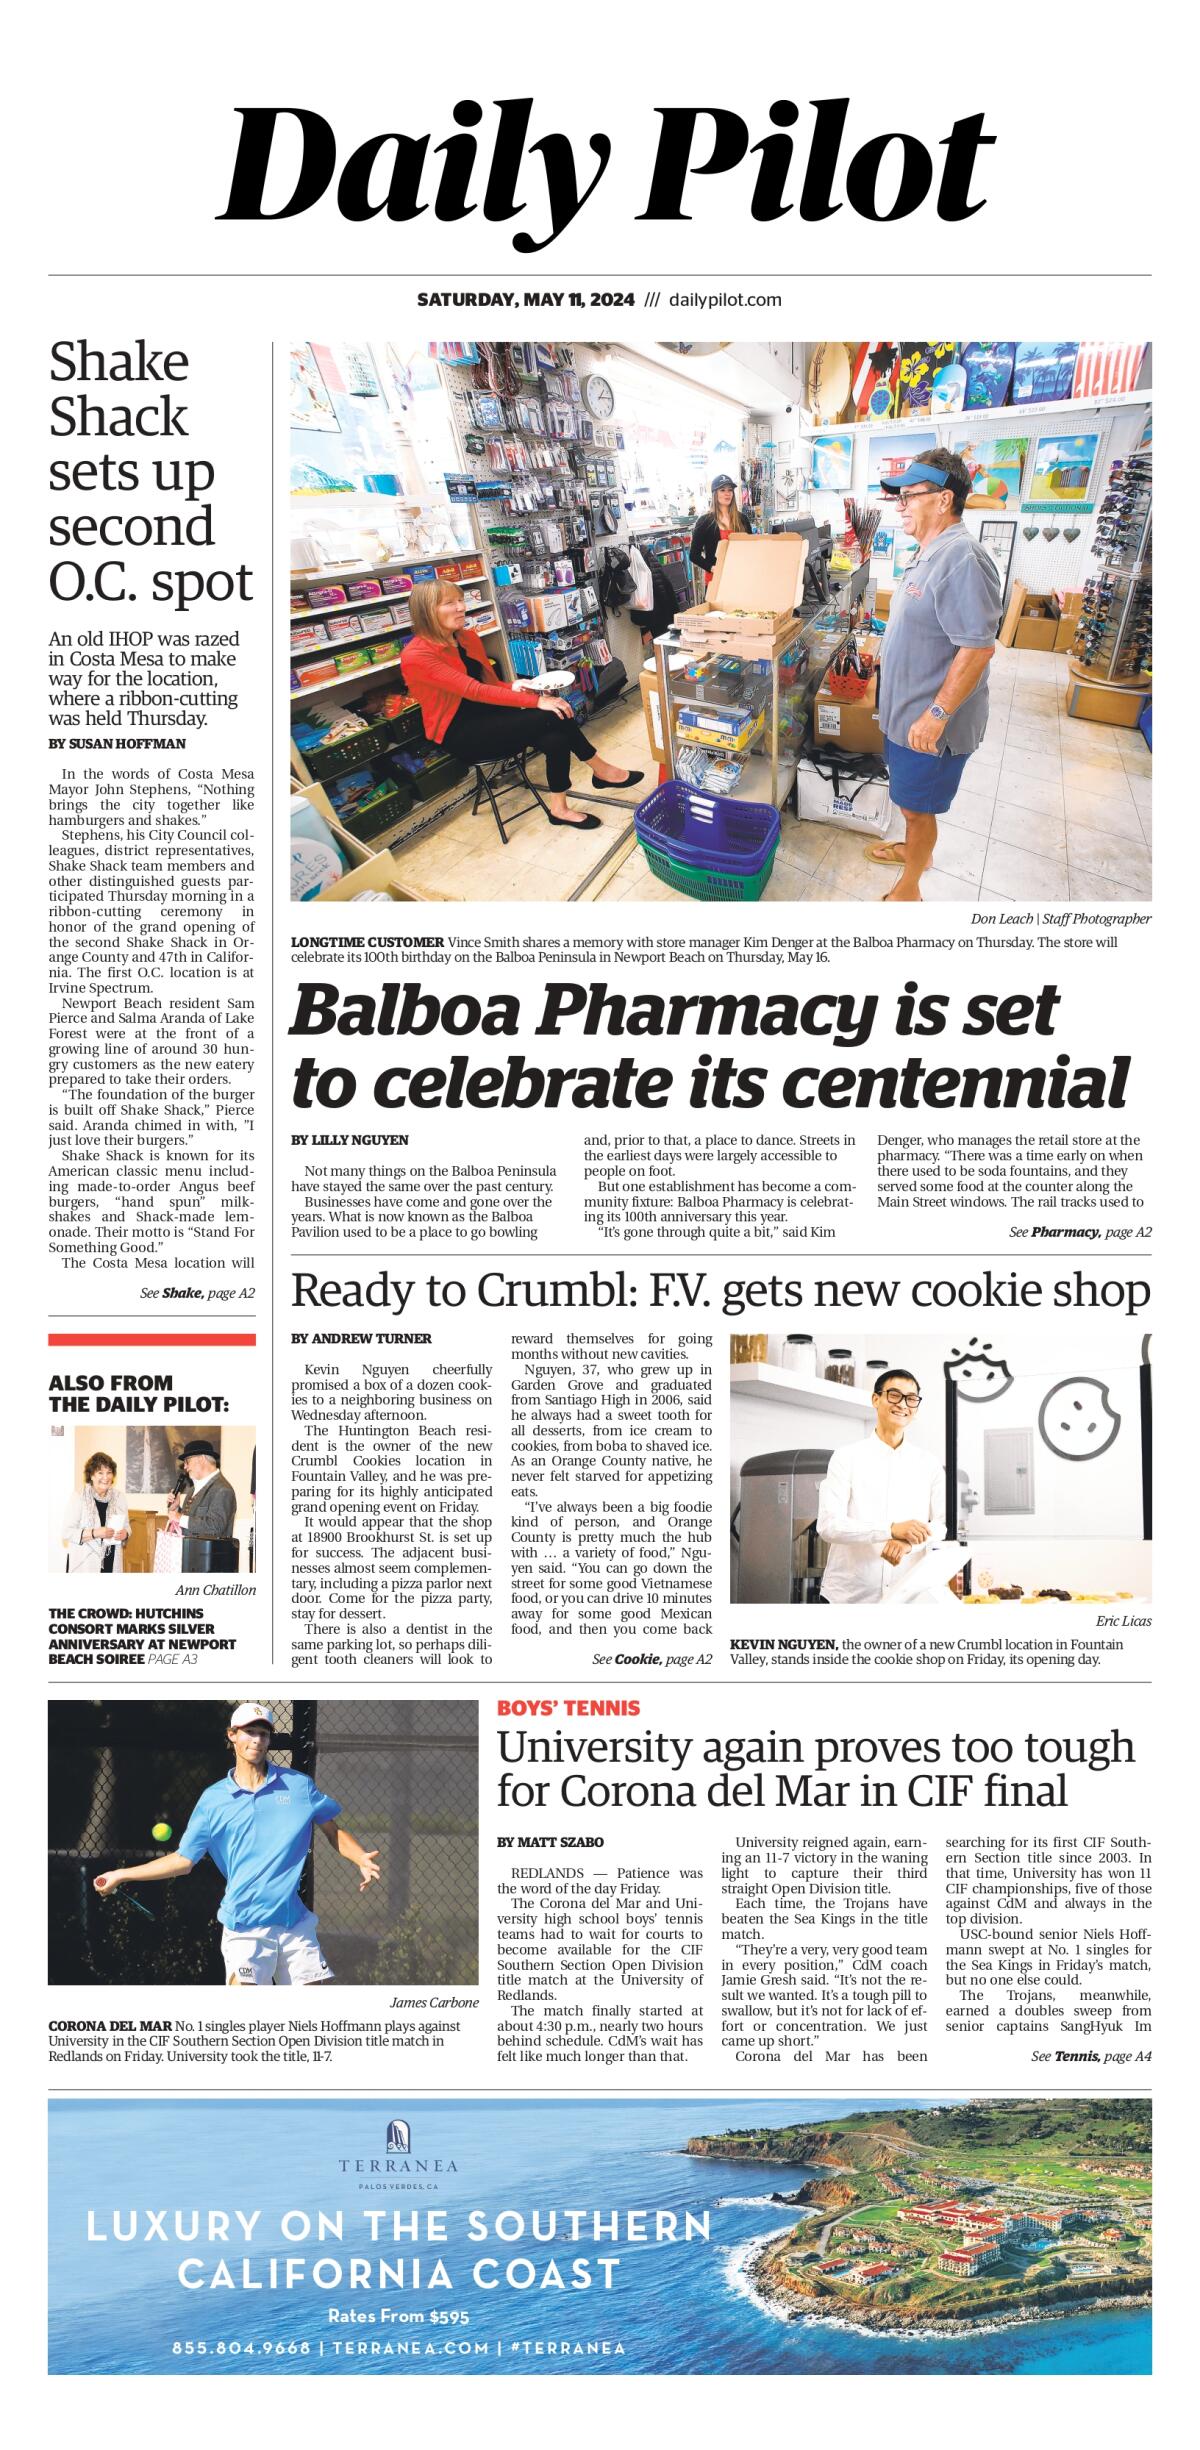 Front page of the Daily Pilot e-newspaper for Saturday, May 11, 2024.